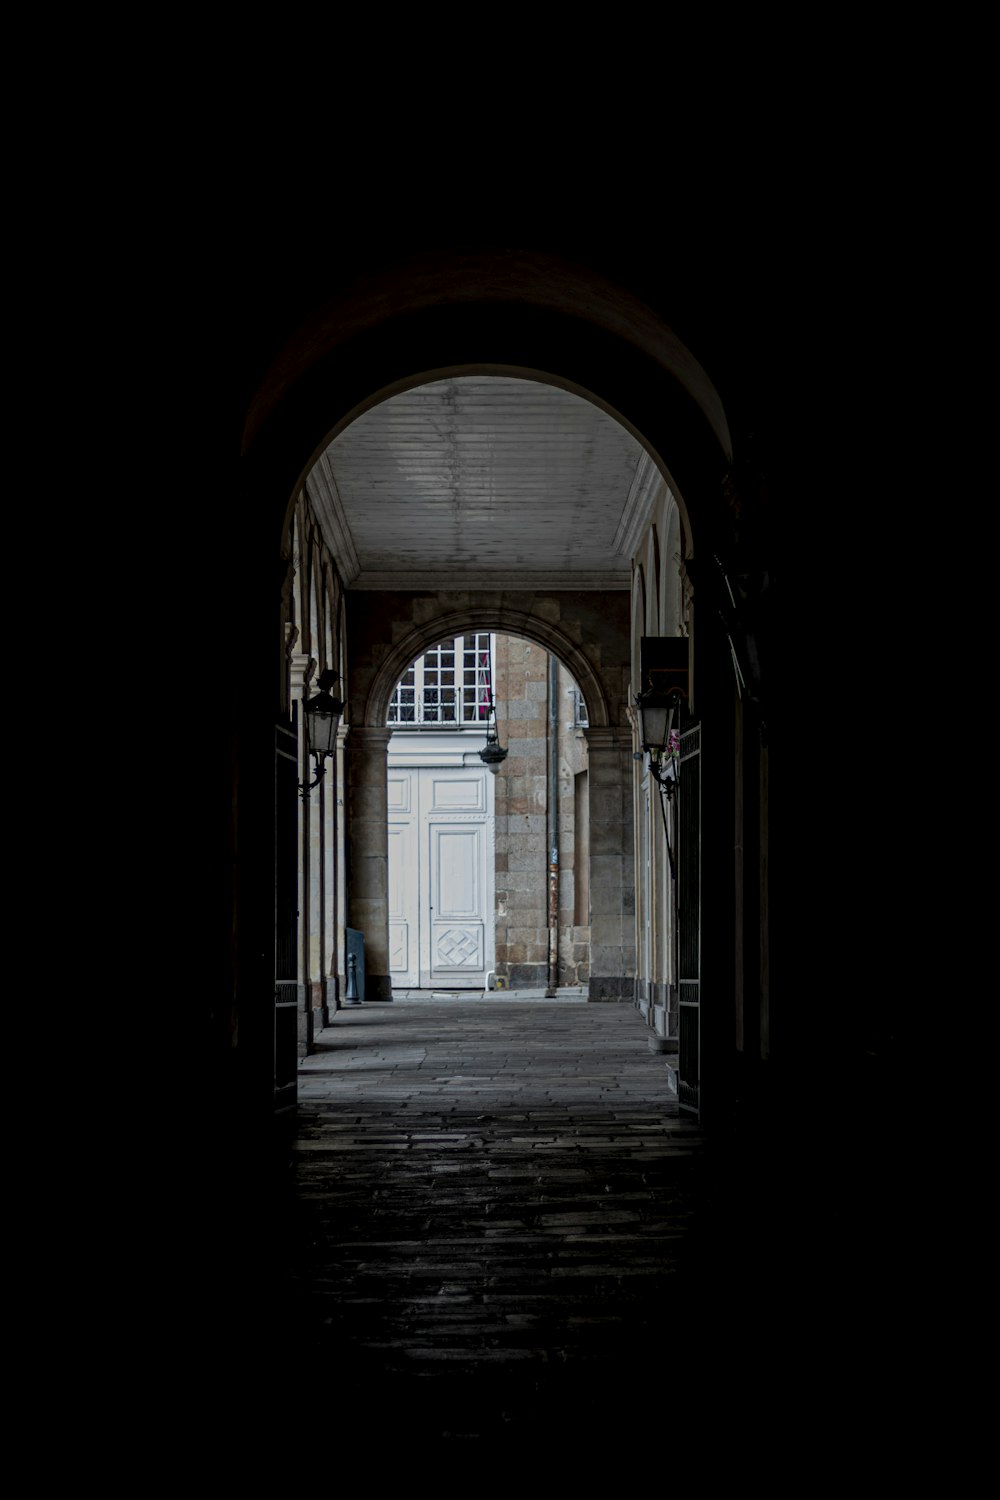 an archway leading into a building with a white door